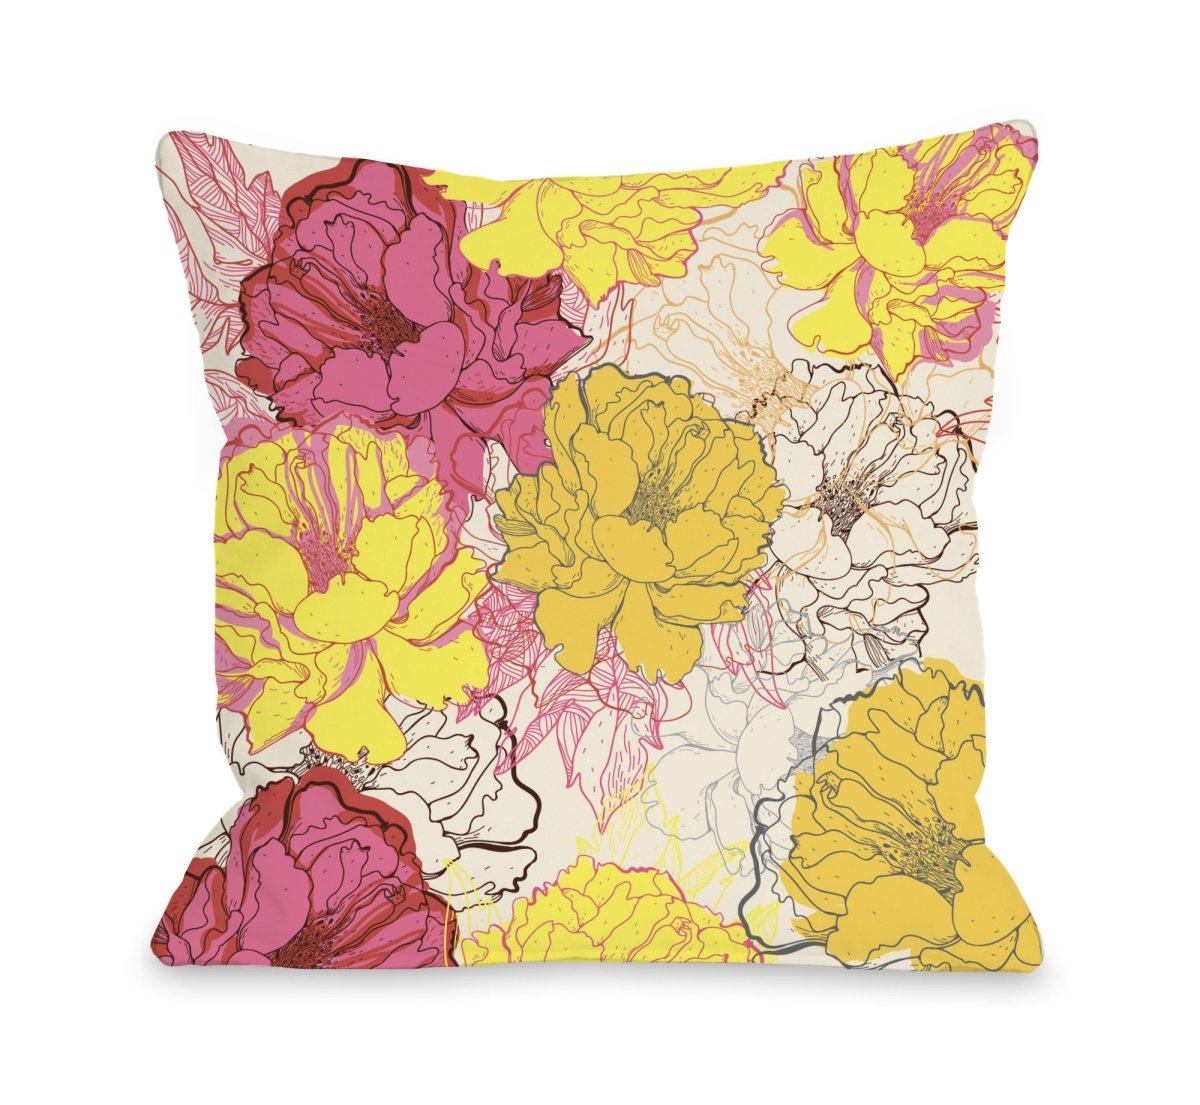 72453pl16o 16 X 16 In. Natalies Blooms Outdoor Pillow, Yellow & Multicolor